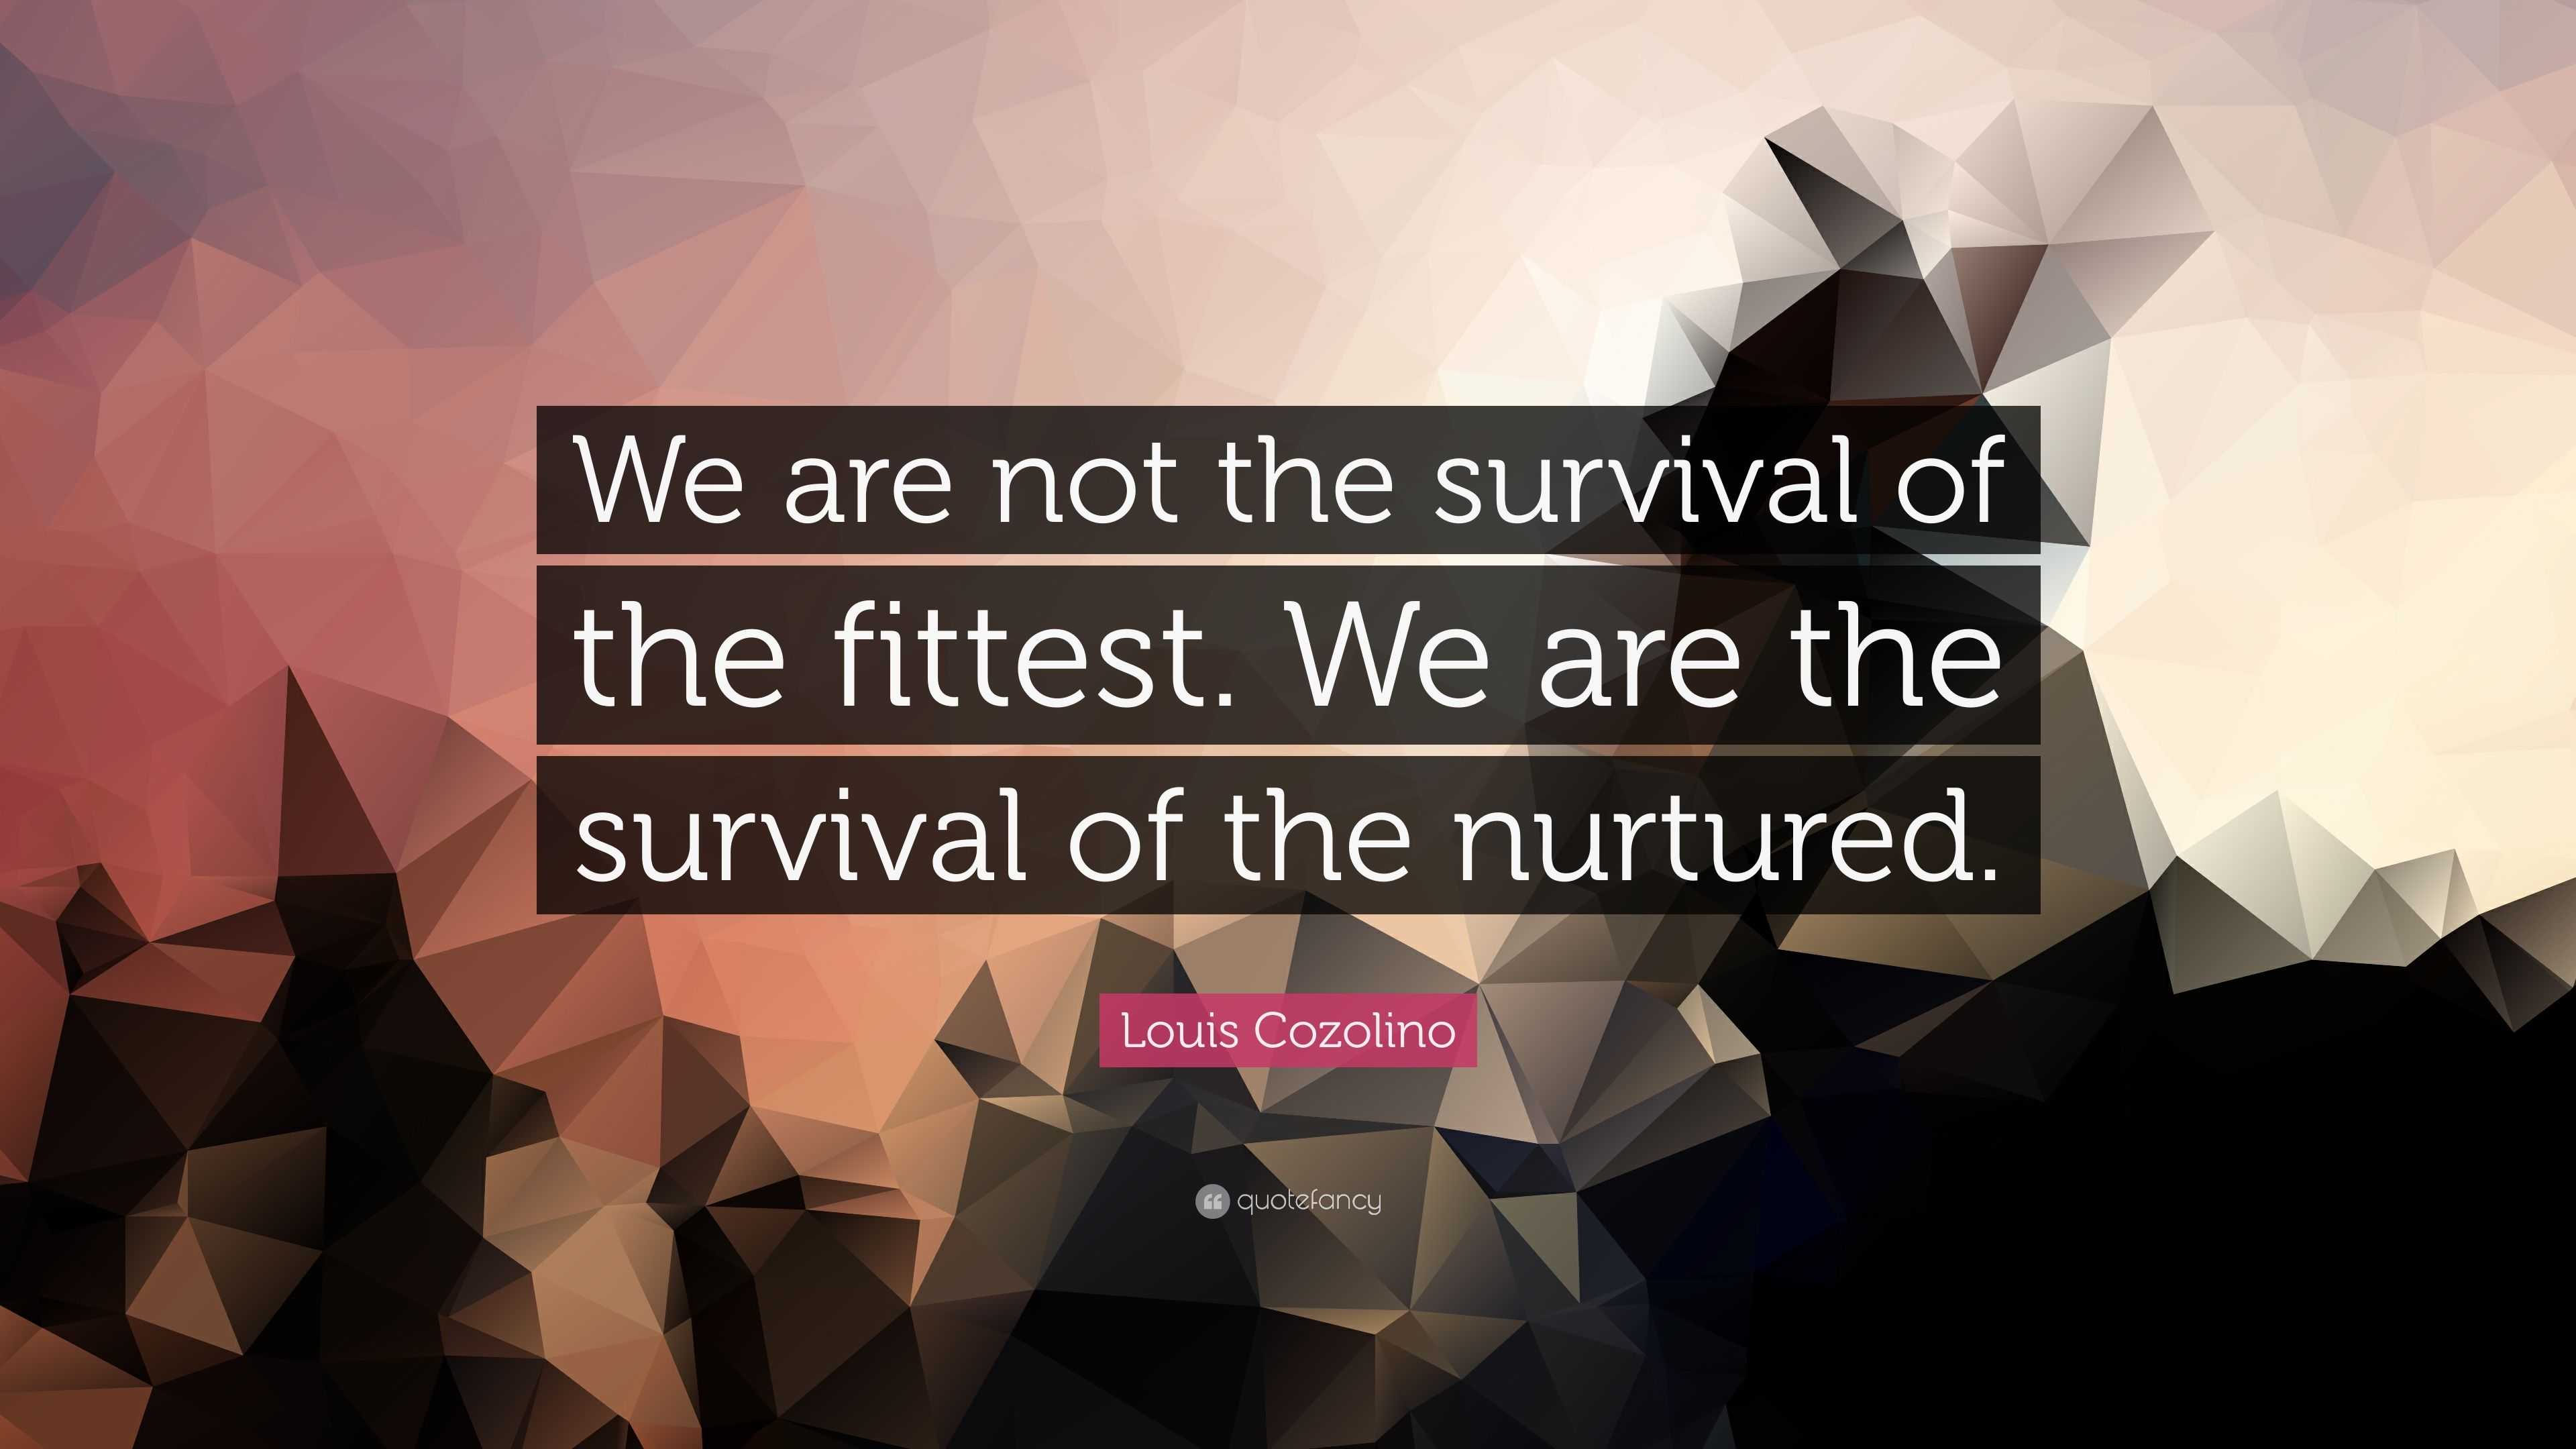 We Are Not The Survival Of The Fittest. We Are The Survival Of The  Nurtured. - Braving the Hot Mess